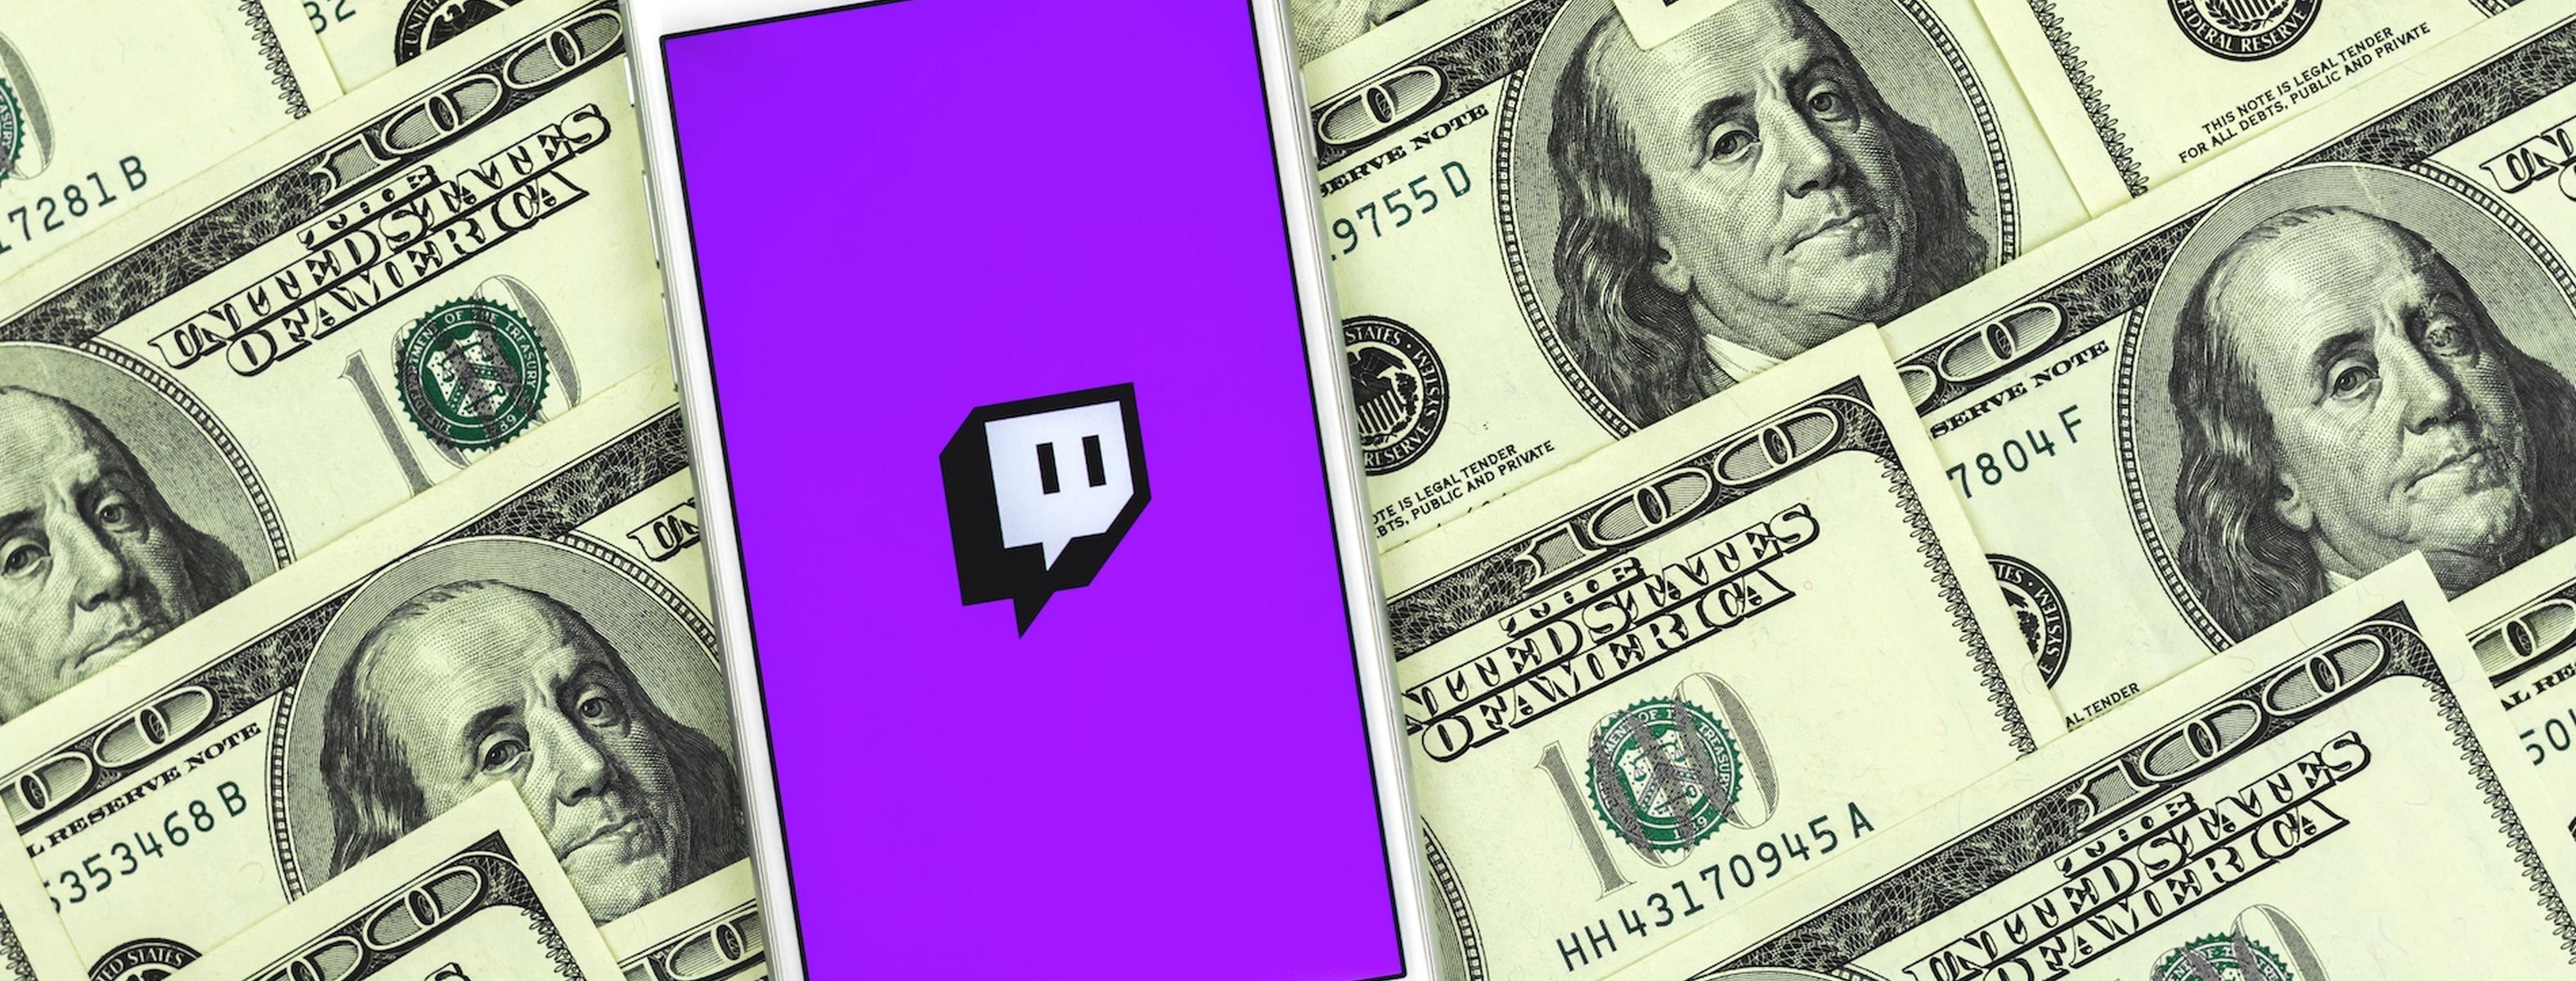 Most Popular Twitch Streamers in Every State